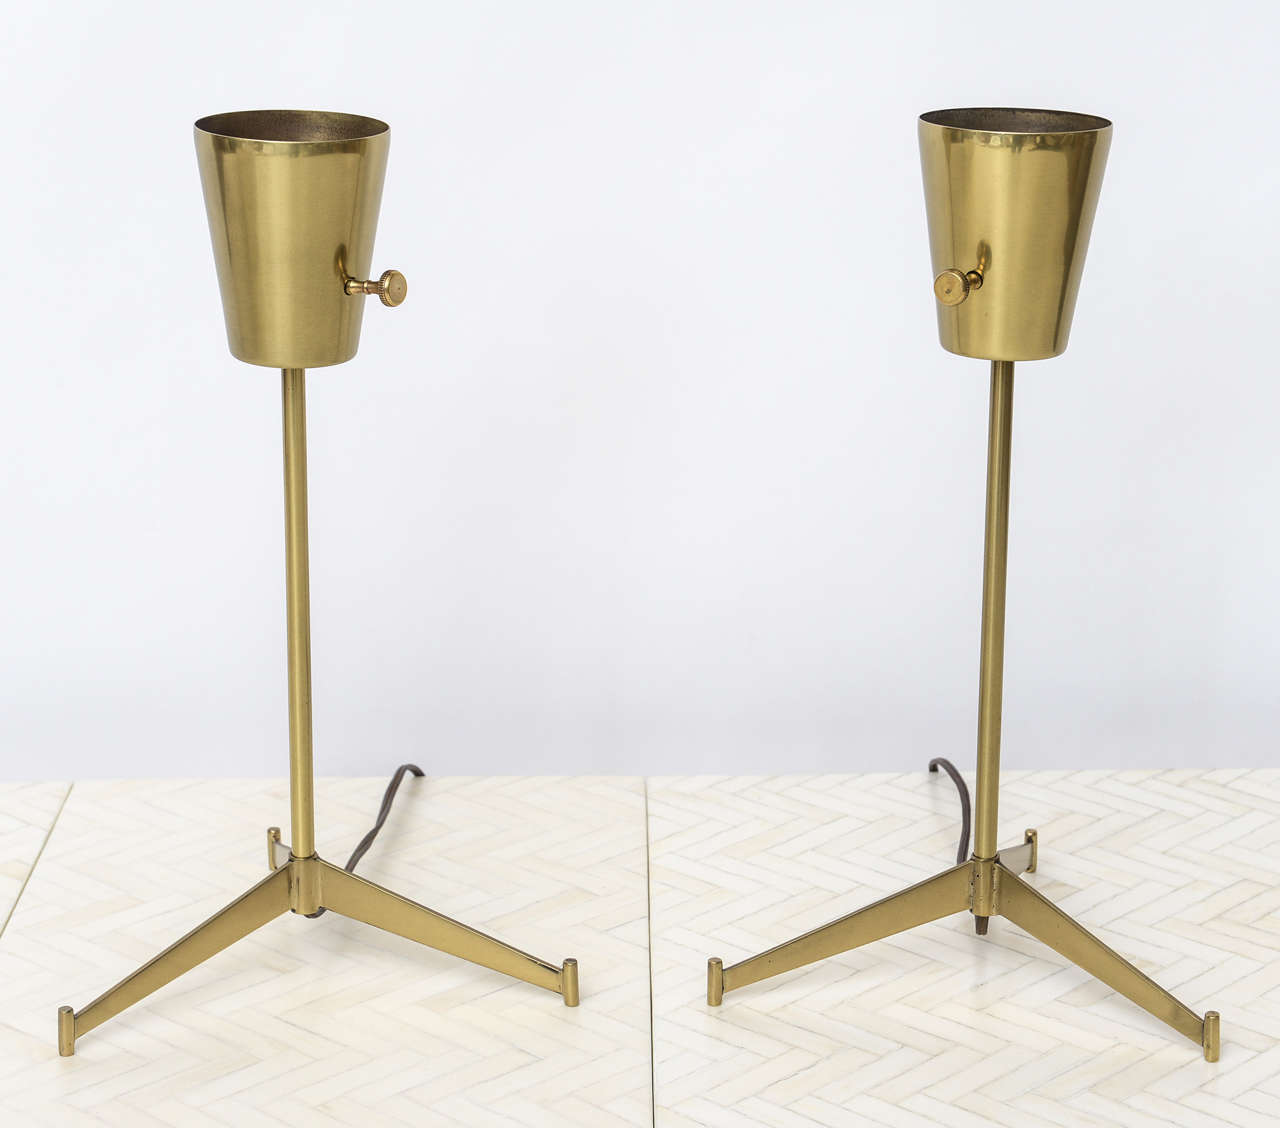 American Pair of Paul McCobb E-9 Brass Table Lamps